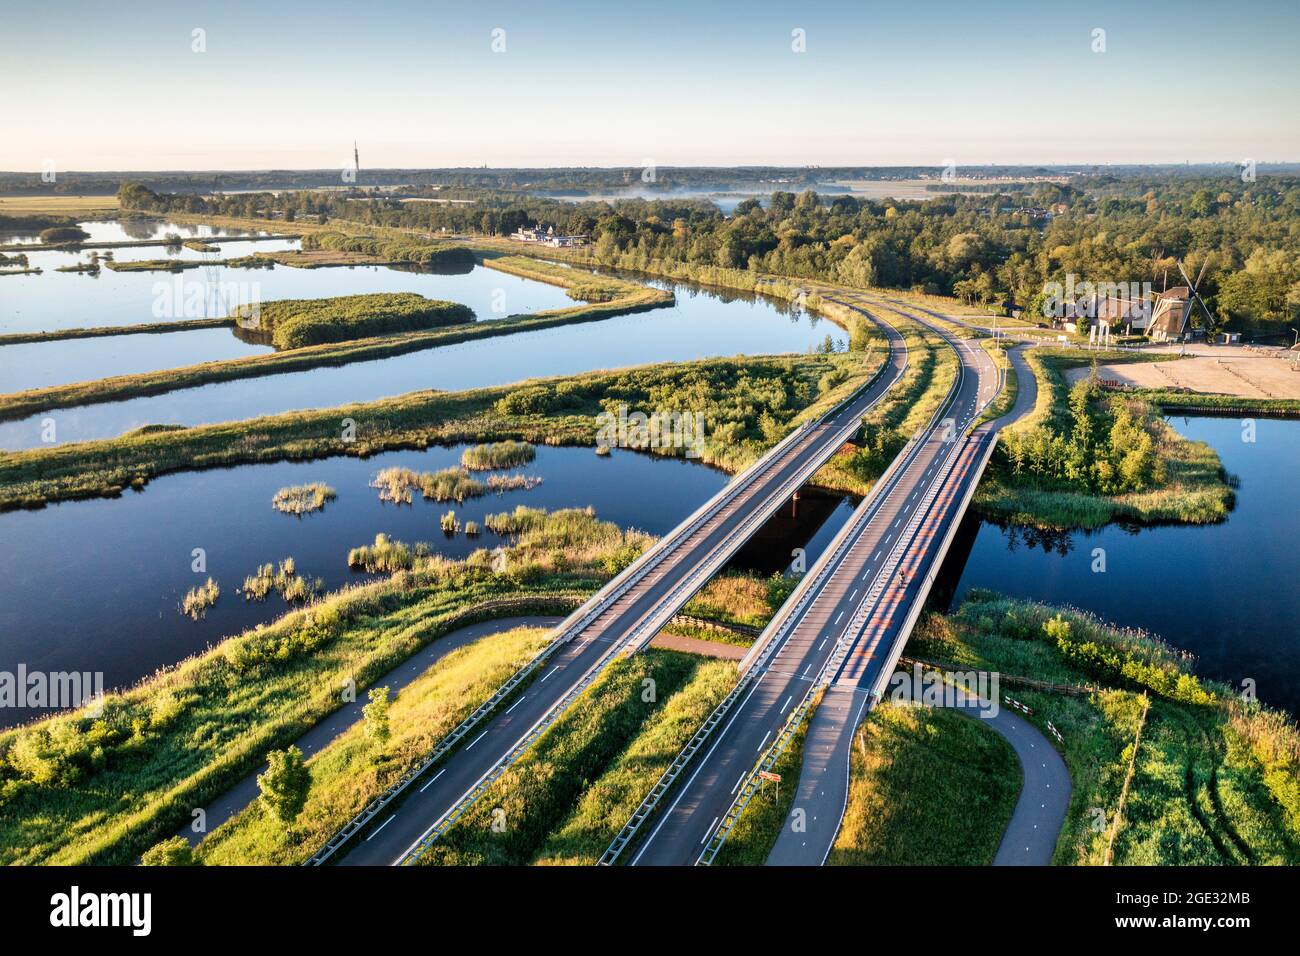 The Netherlands, Ankeveen. Passage for nature to connect lakes Ankeveense Plassen with lake Naardermeer. Aerial. Stock Photo